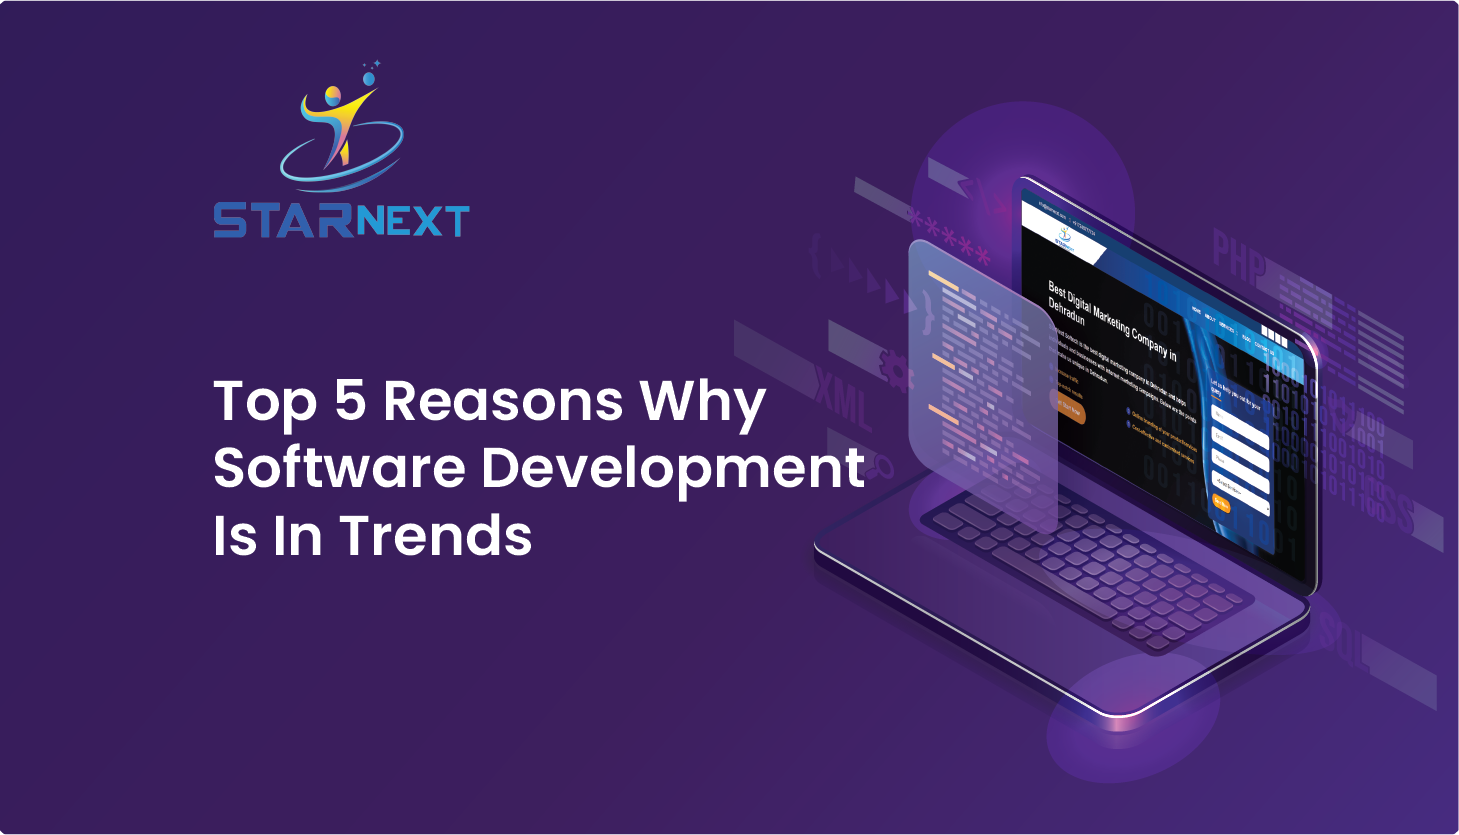 Top 5 Reasons Why Software Development Is In Trends